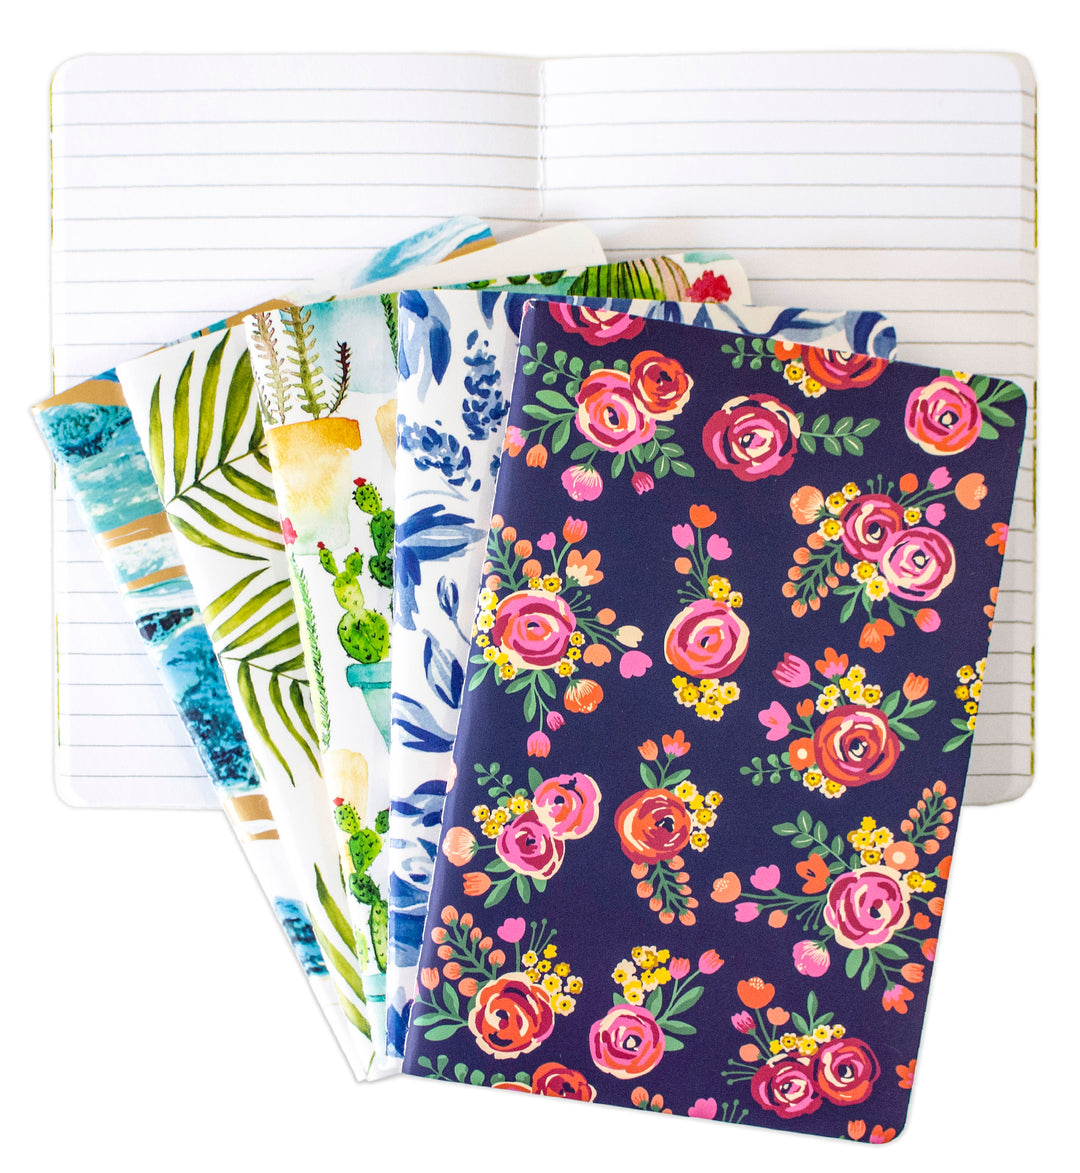 Assorted Wild Flowers lined letter writing paper / 20 sheets in each pack